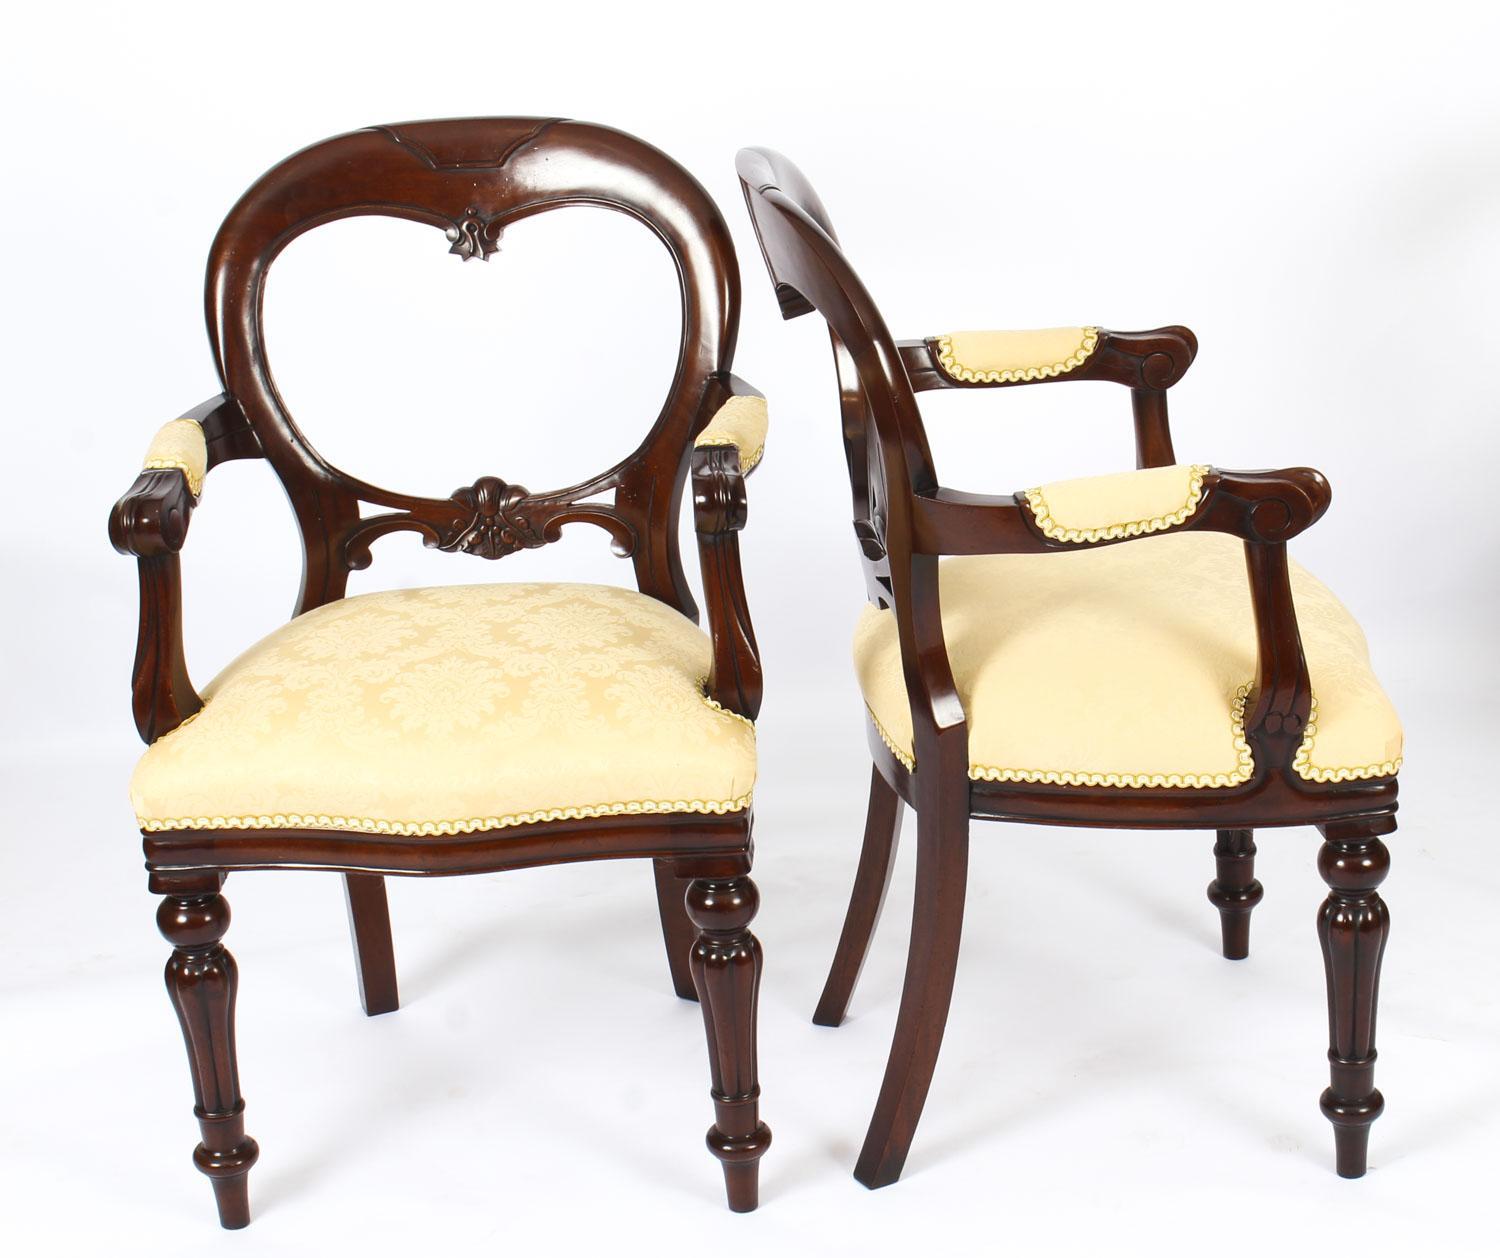 This is an absolutely fantastic vintage set of fourteen balloon back dining chairs, dating from the late 20th century.

These chairs have been masterfully crafted in beautiful solid mahogany throughout and the finish and attention to detail on